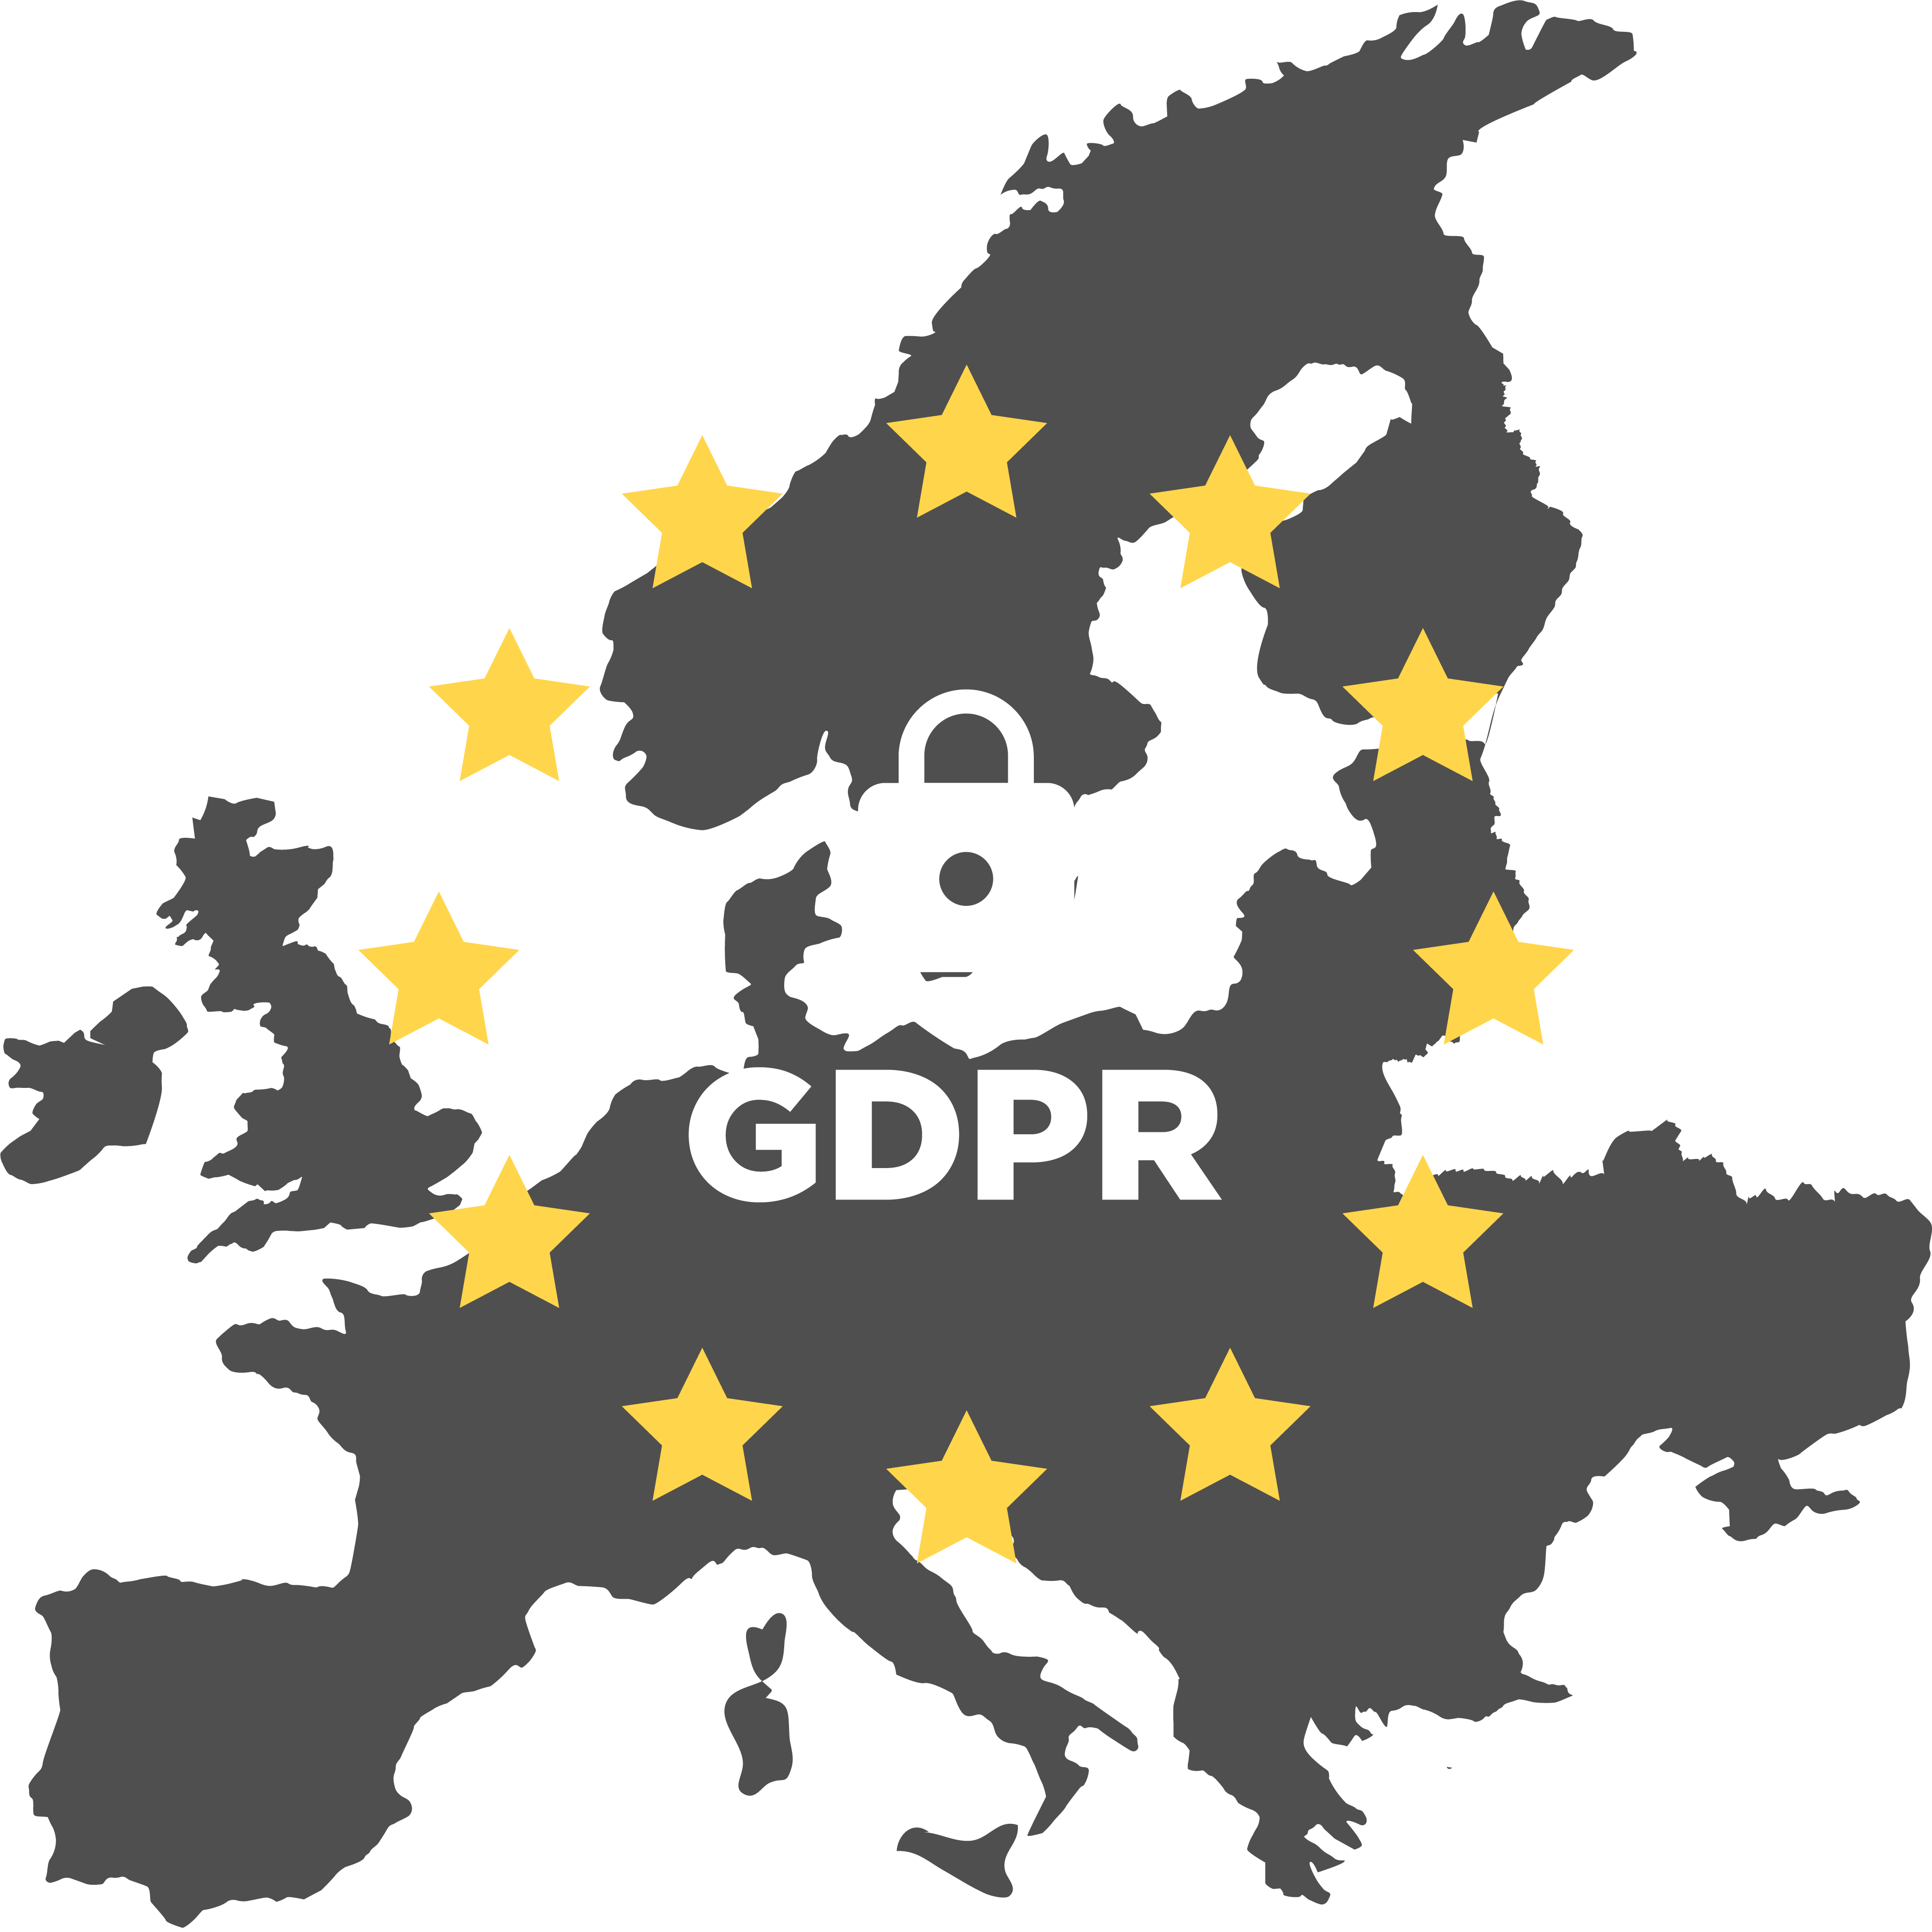 GDPR - THE MOST COMPREHENSIVE DATA PROTECTION LAW